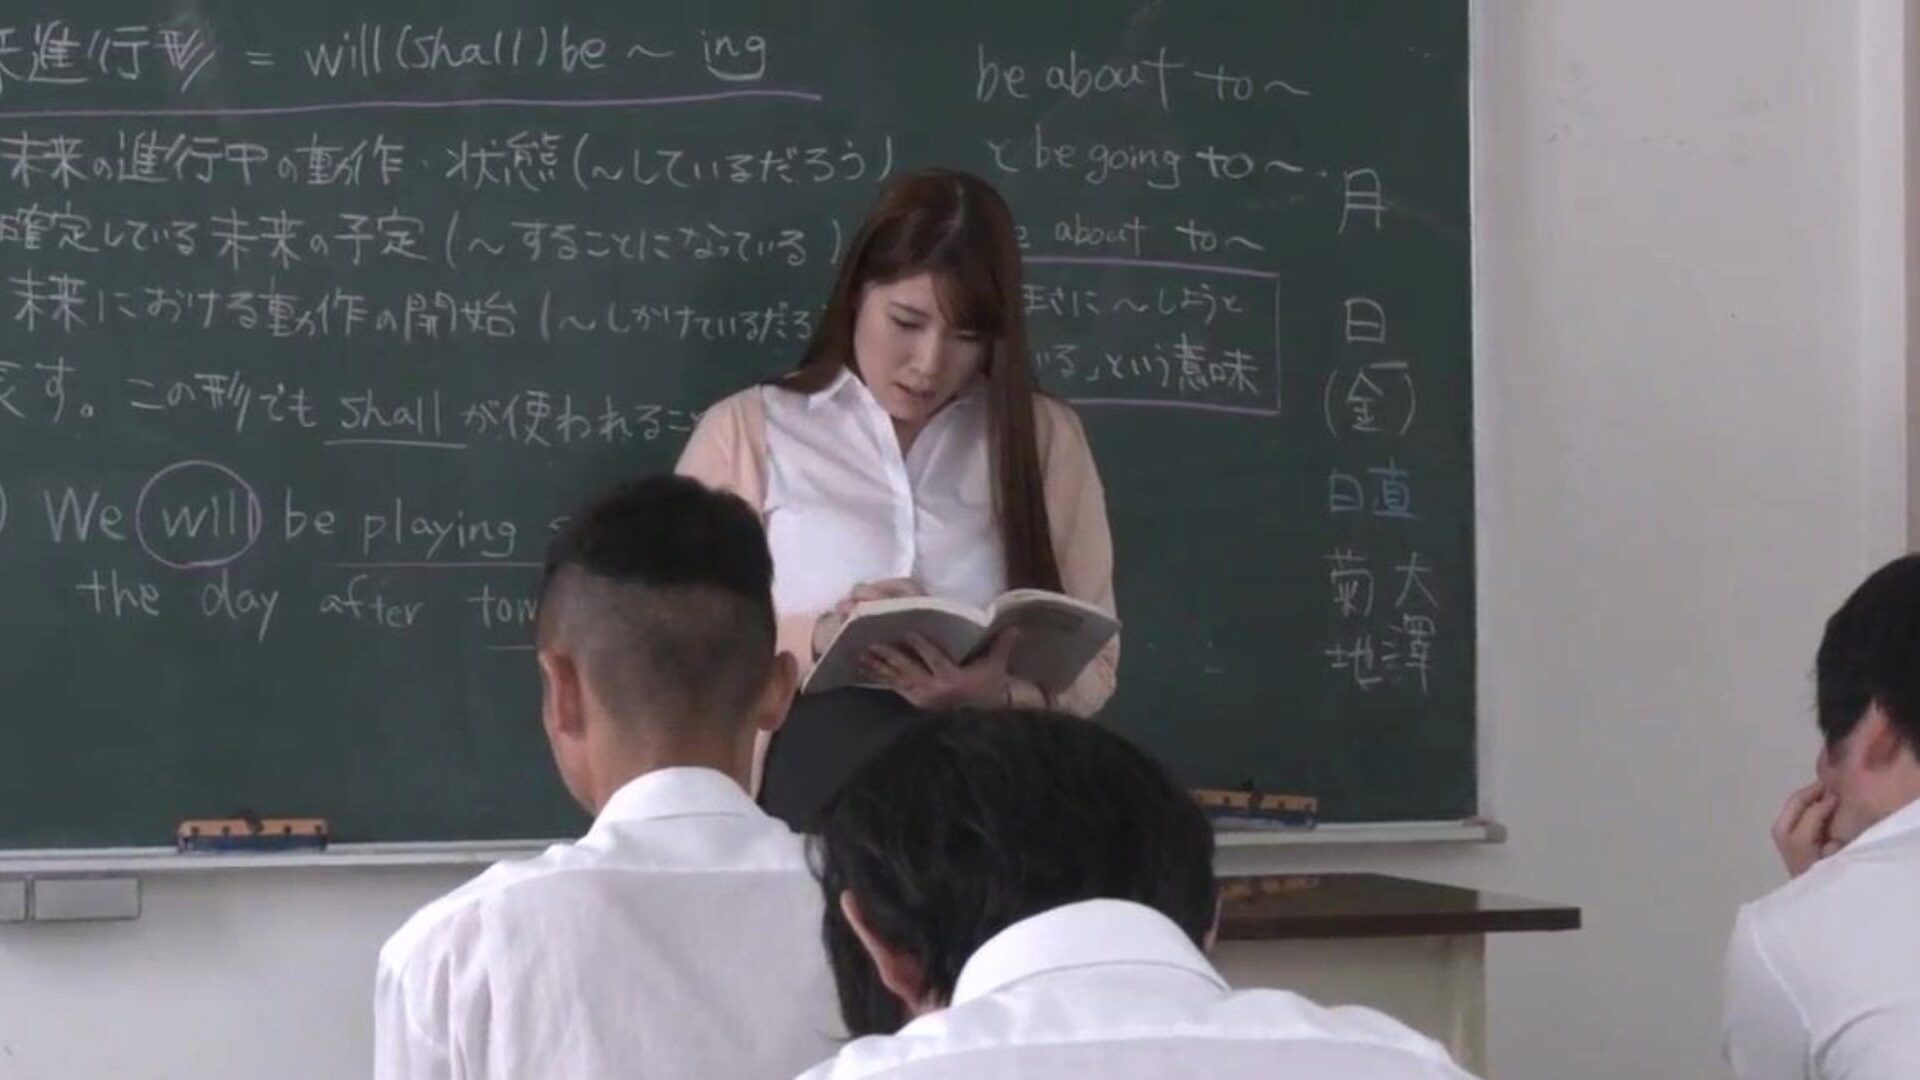 Xxx Video Girl Teachers And Students - Teachers Get Horny And Fucked Hard In Class Video 01 - XXX BULE